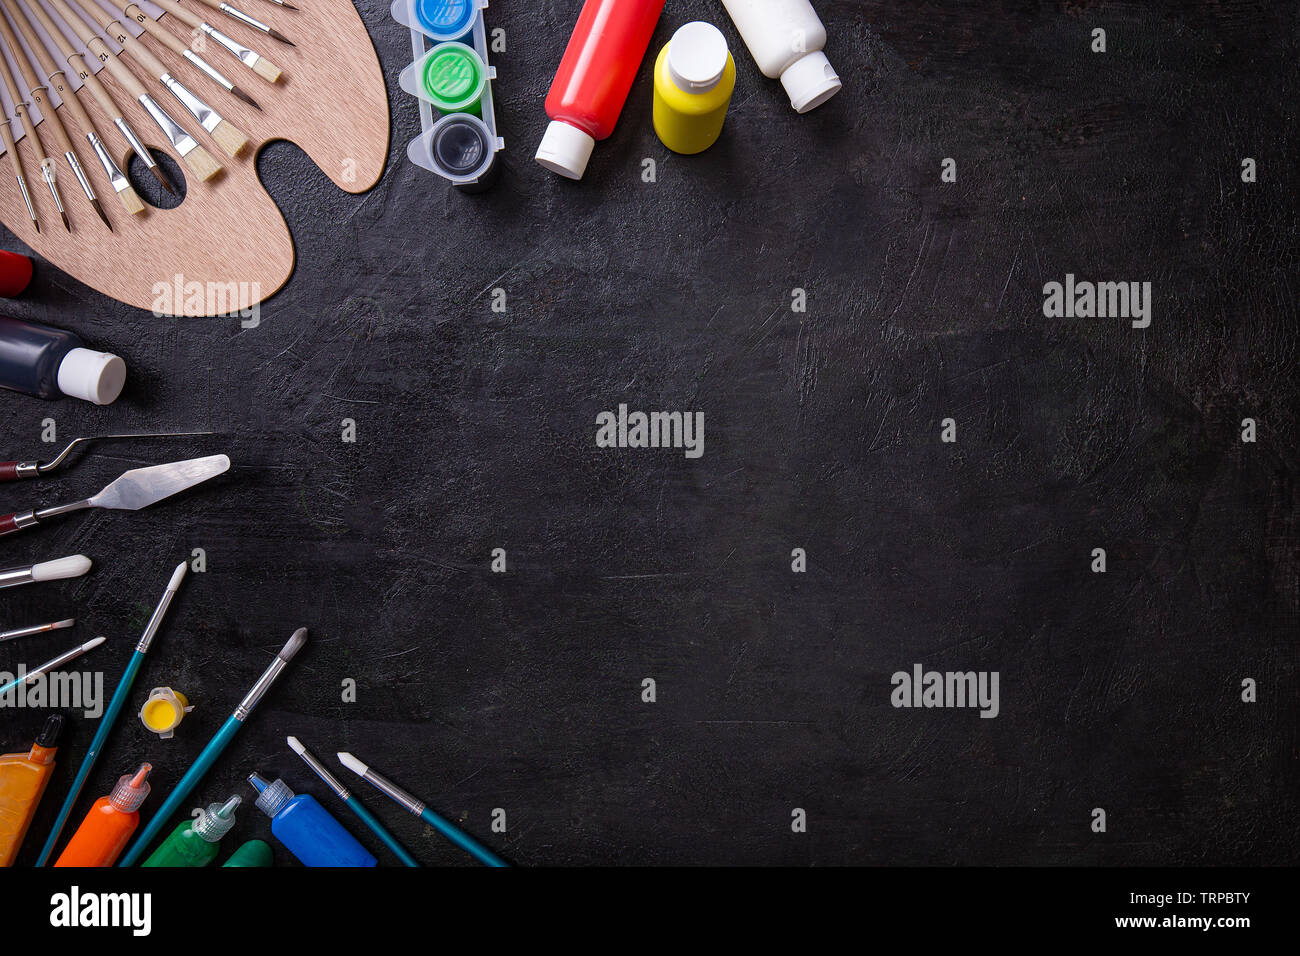 School supplies stationery equipment on chalkboard with copy space Stock Photo